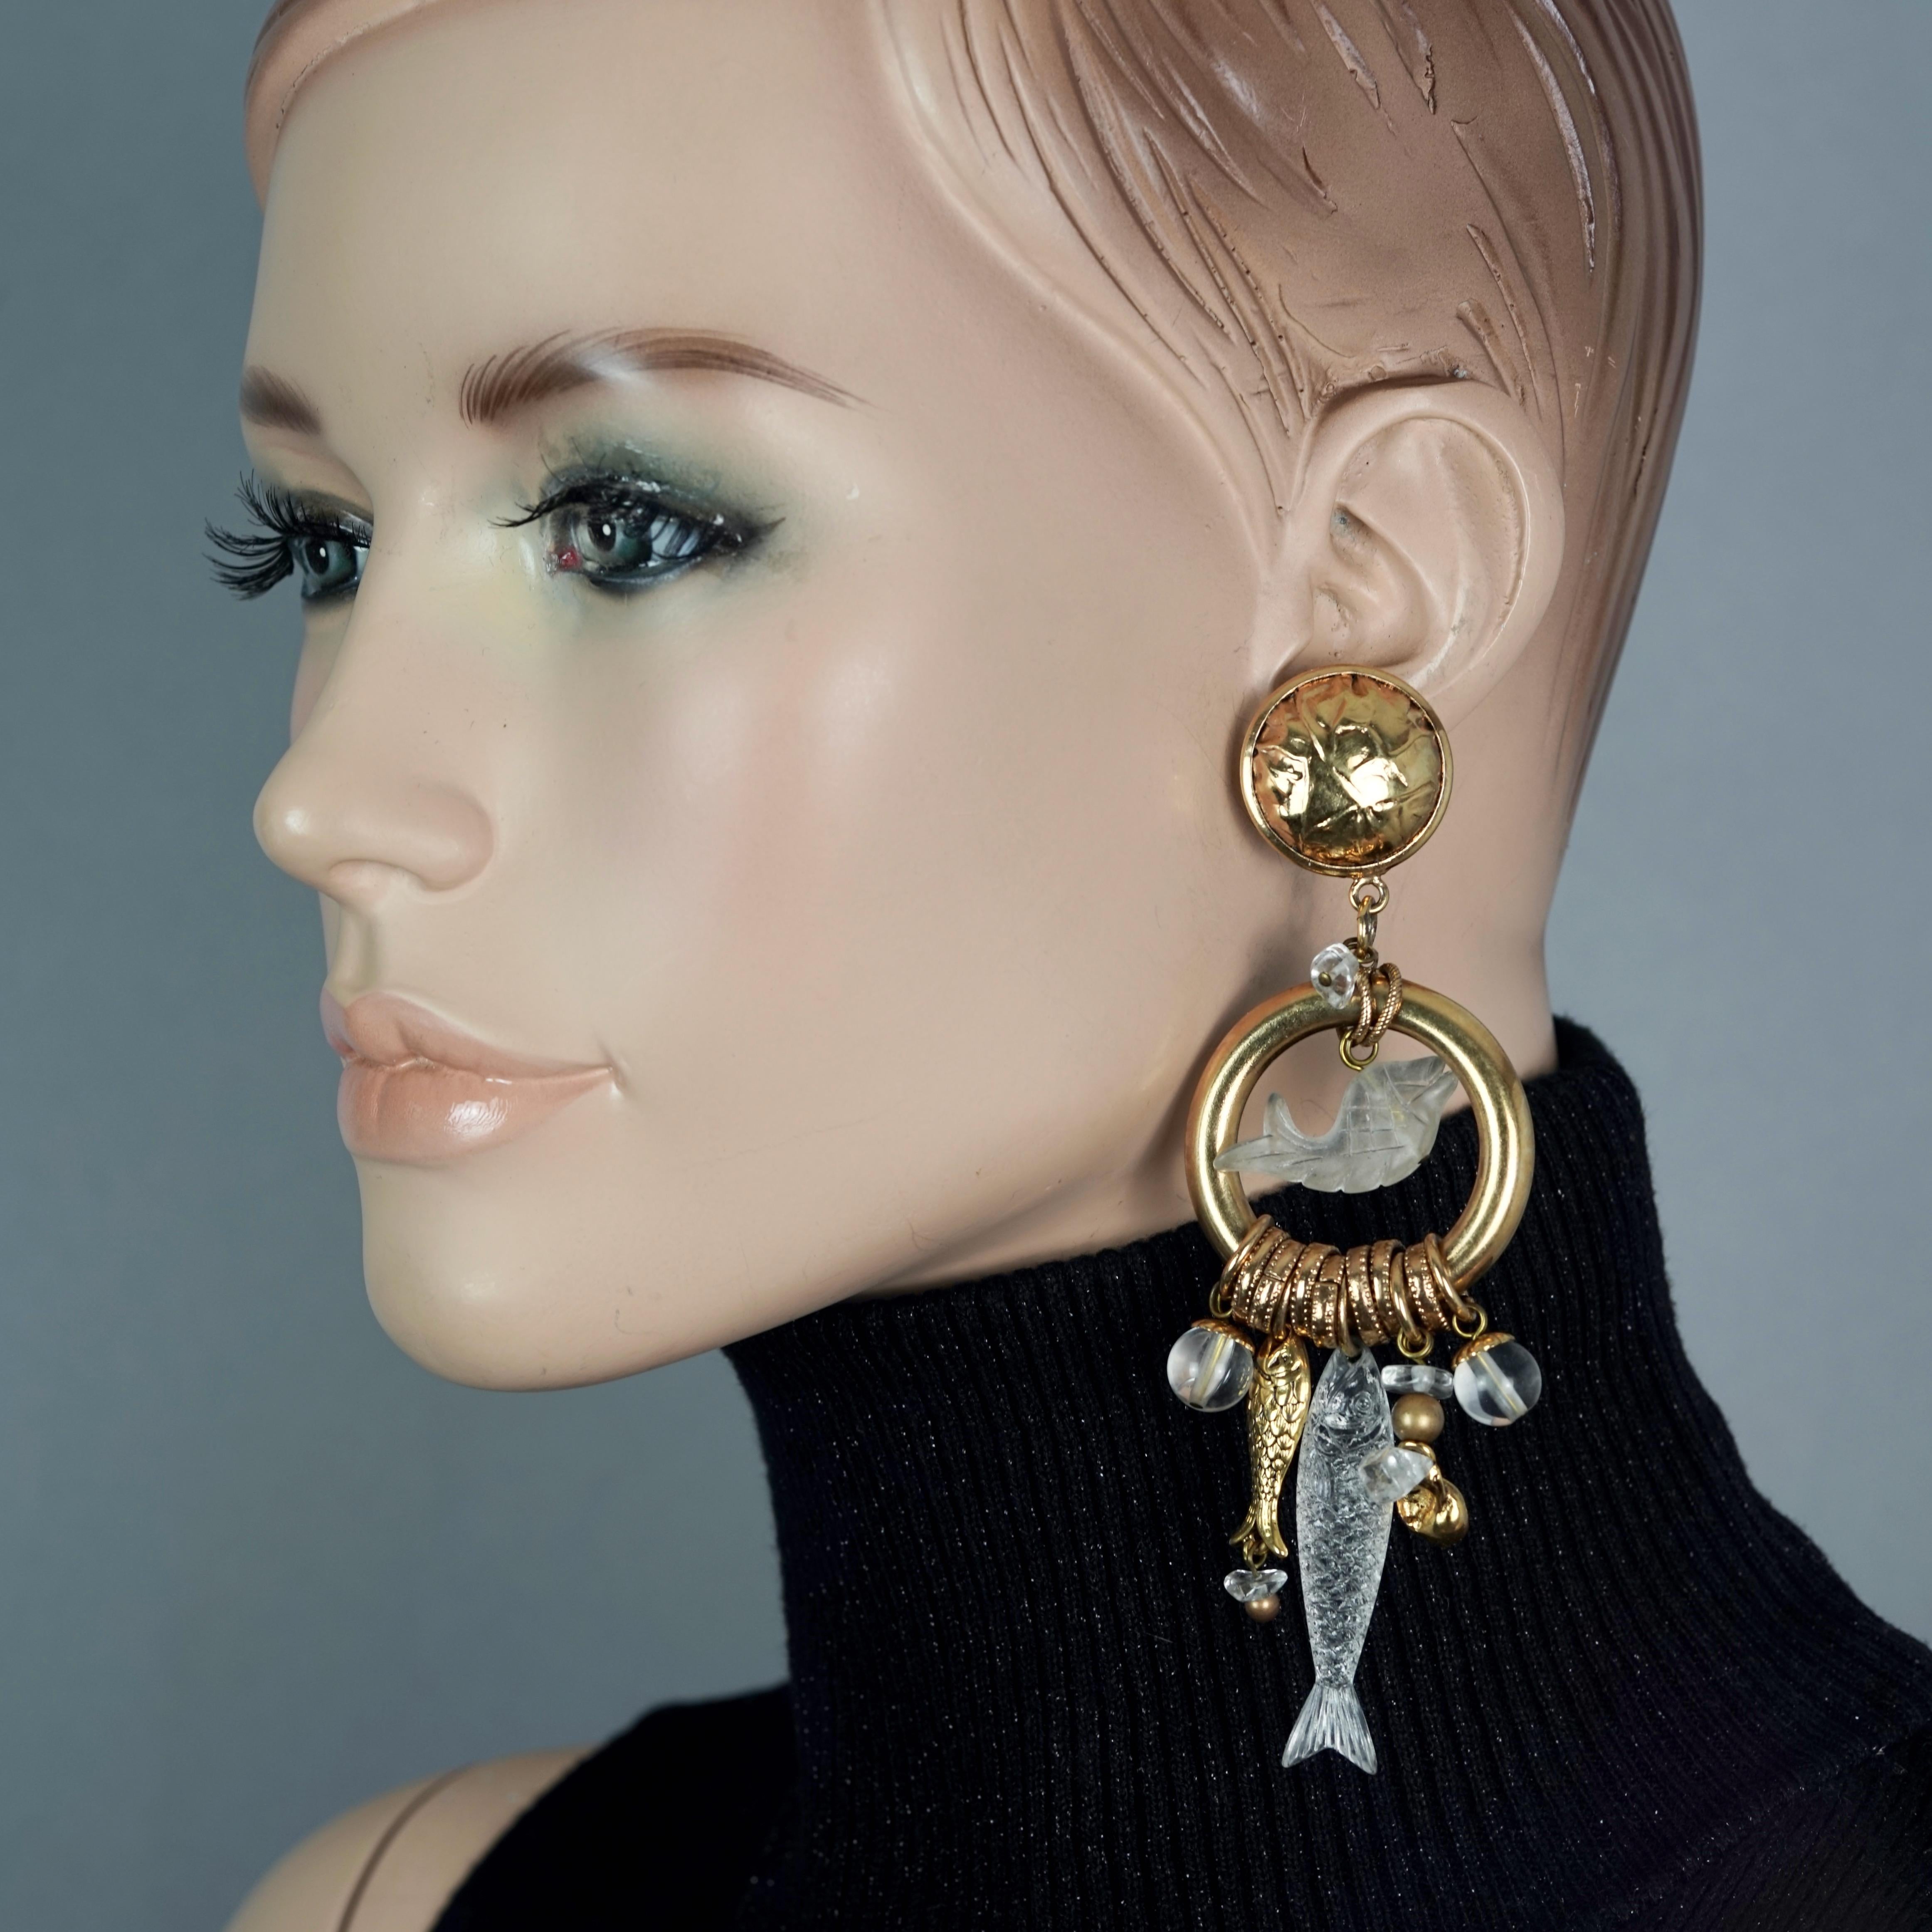 Vintage ZOE COSTE Lucite Fish Sea Shells Charm Dangling Earrings

Measurements:
Height: 4.80 inches (12.2 cm)
Width: 1.65 inches (4.2 cm)
Weight: 32 grams

Features:
- 100% Authentic ZOE COSTE.
- Long Earrings with Lucite fish and gilt sea shell